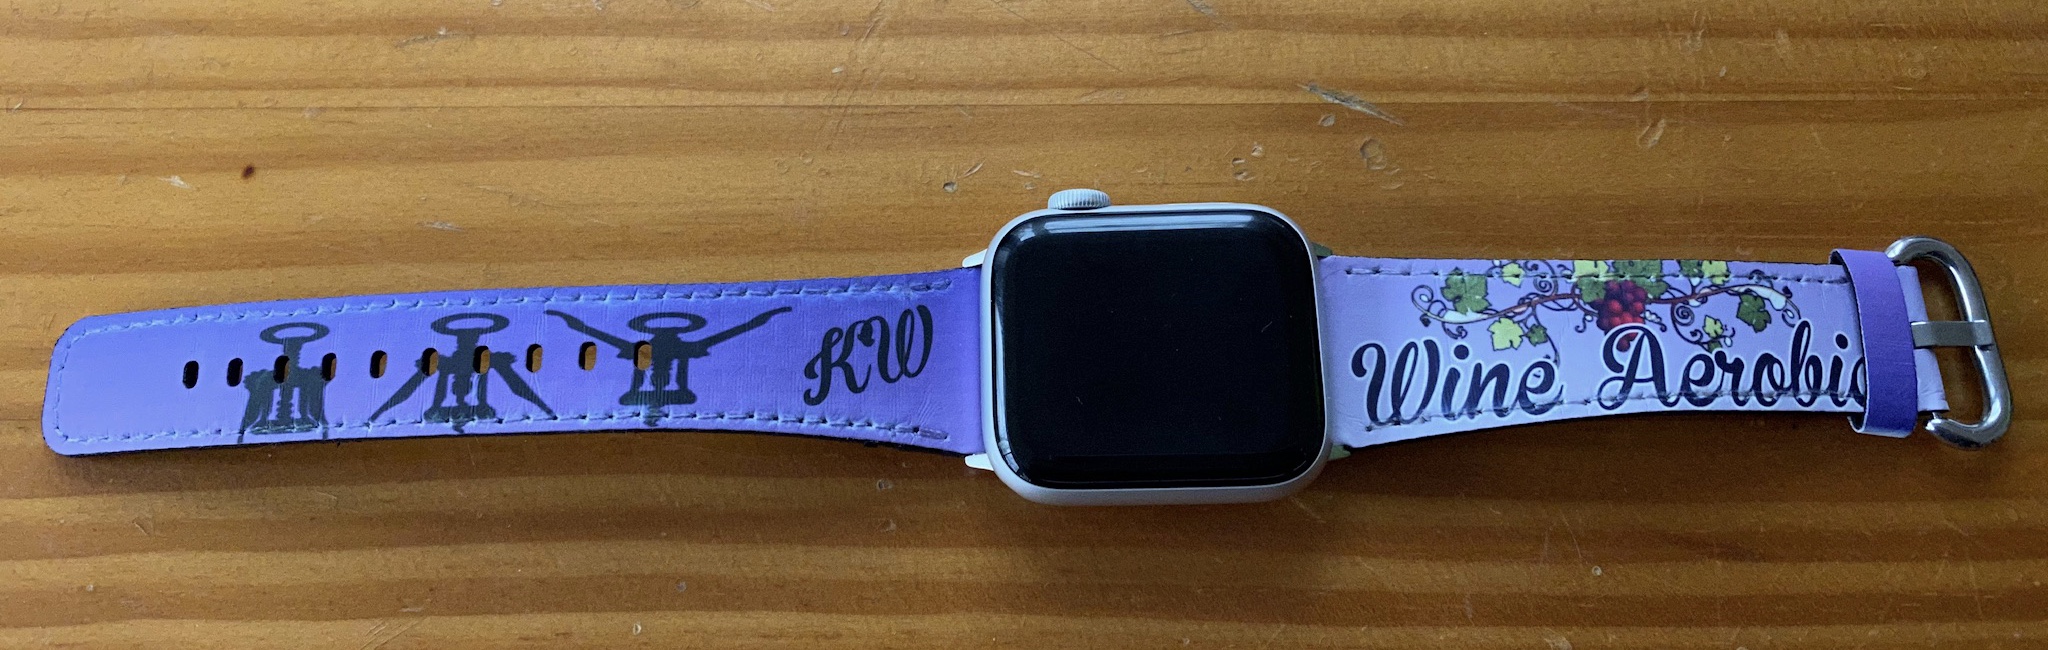 Watchband made with sublimation printing